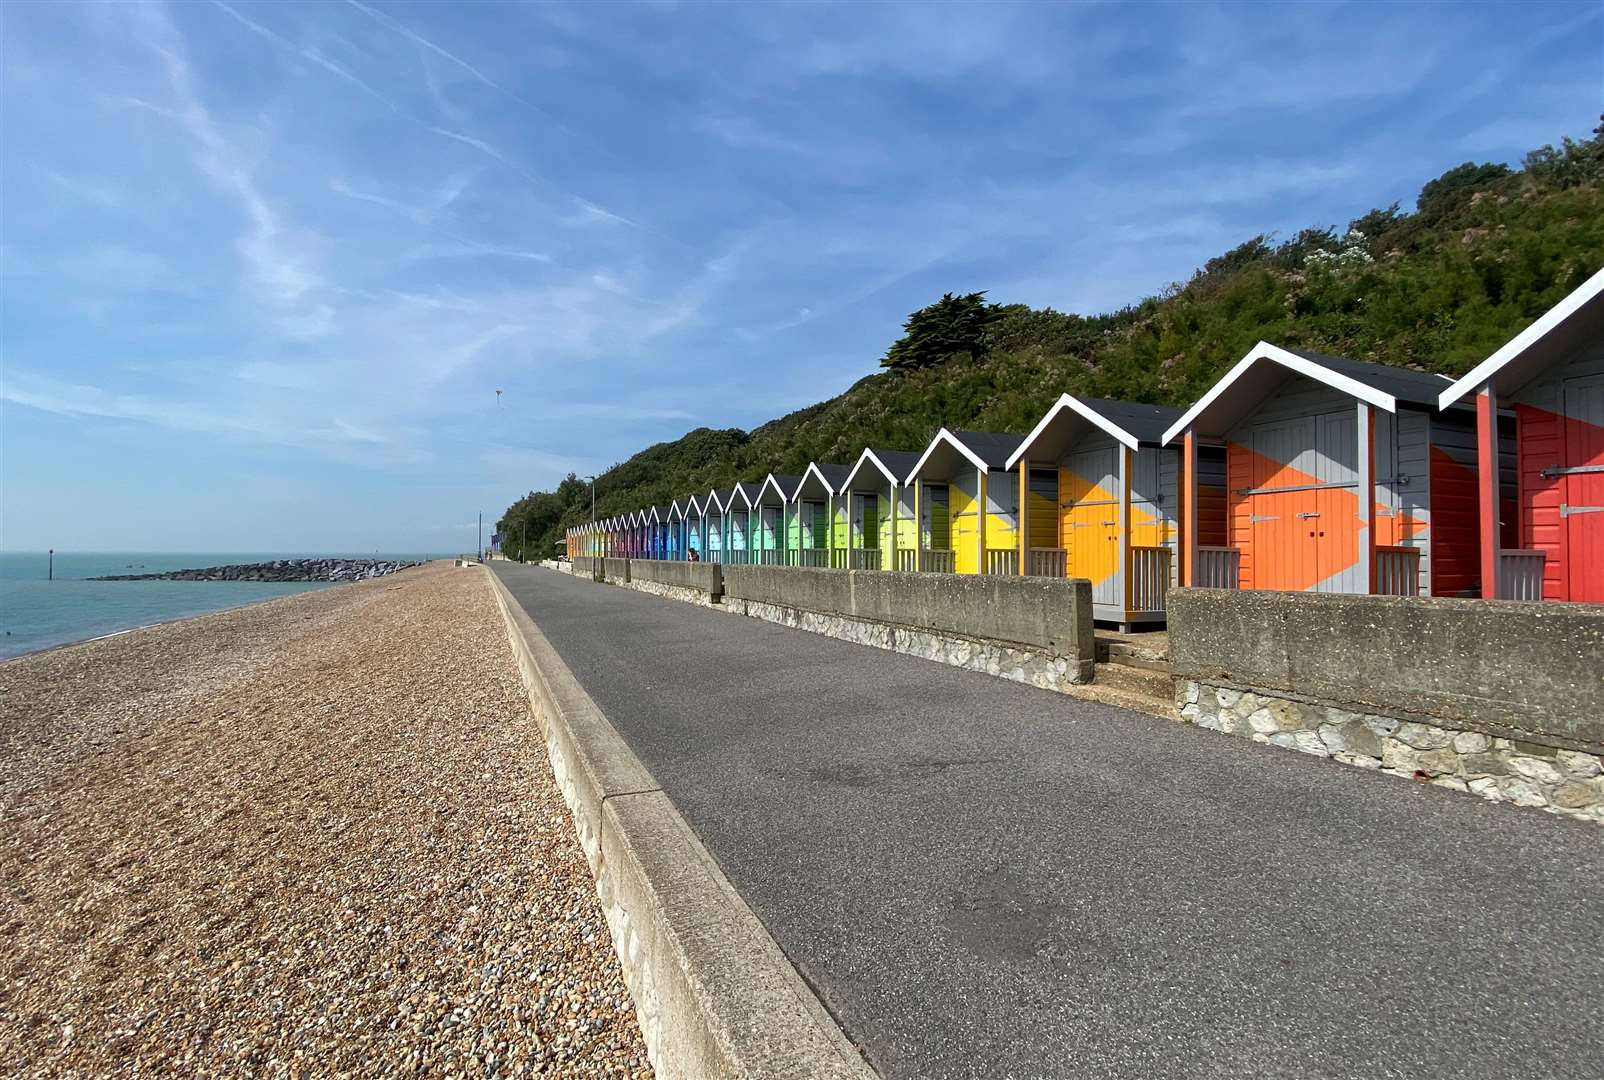 126 beach huts were added on the promenade between Folkestone and Sandgate in 2021